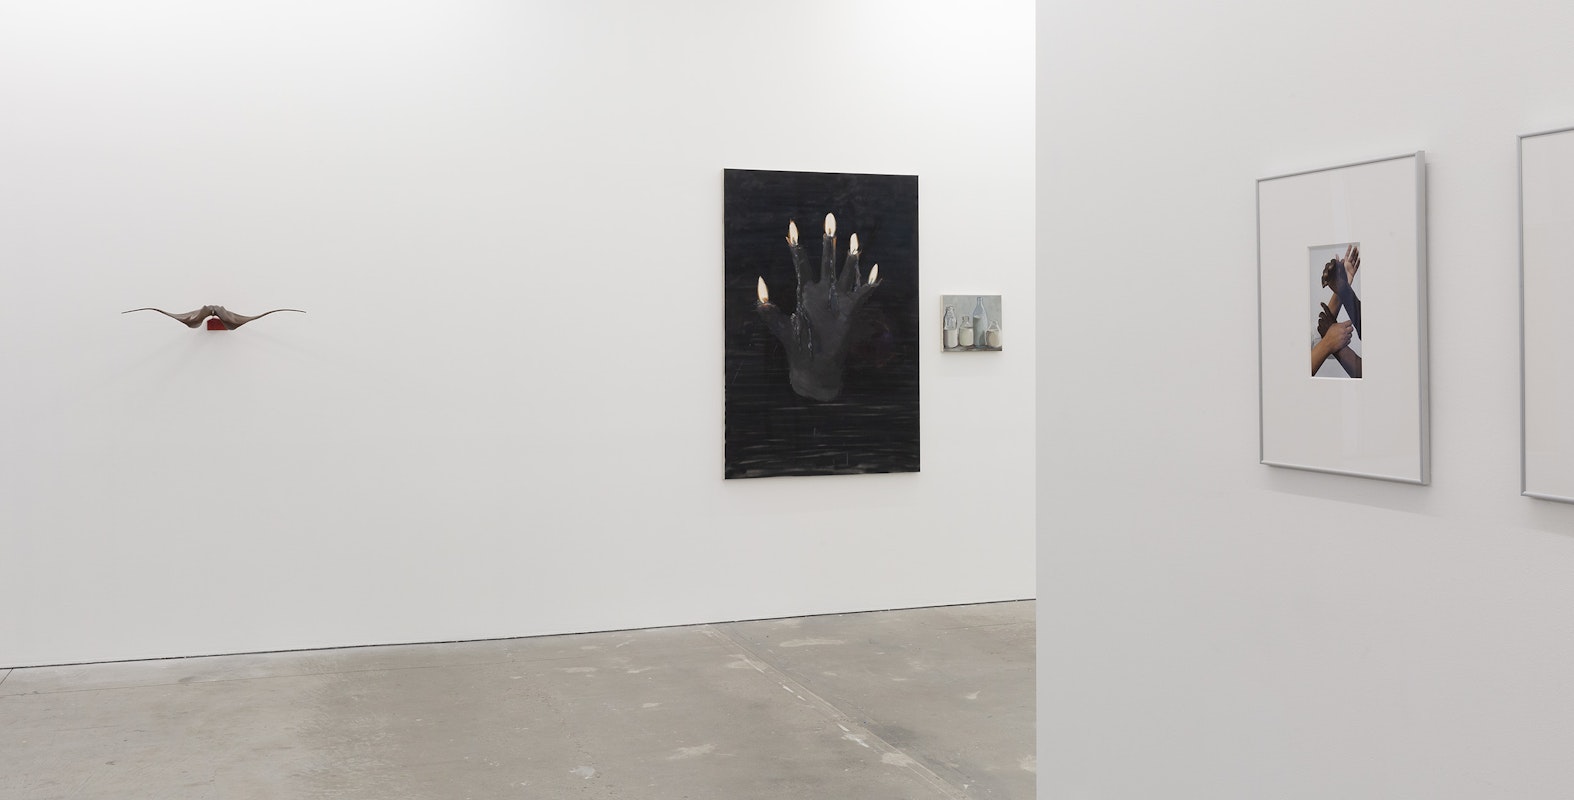 Installation view of Gertrude Studios 2023, featuring works by Francis Carmody, Gian Manik and Arini Byng. Photo: Christian Capurro